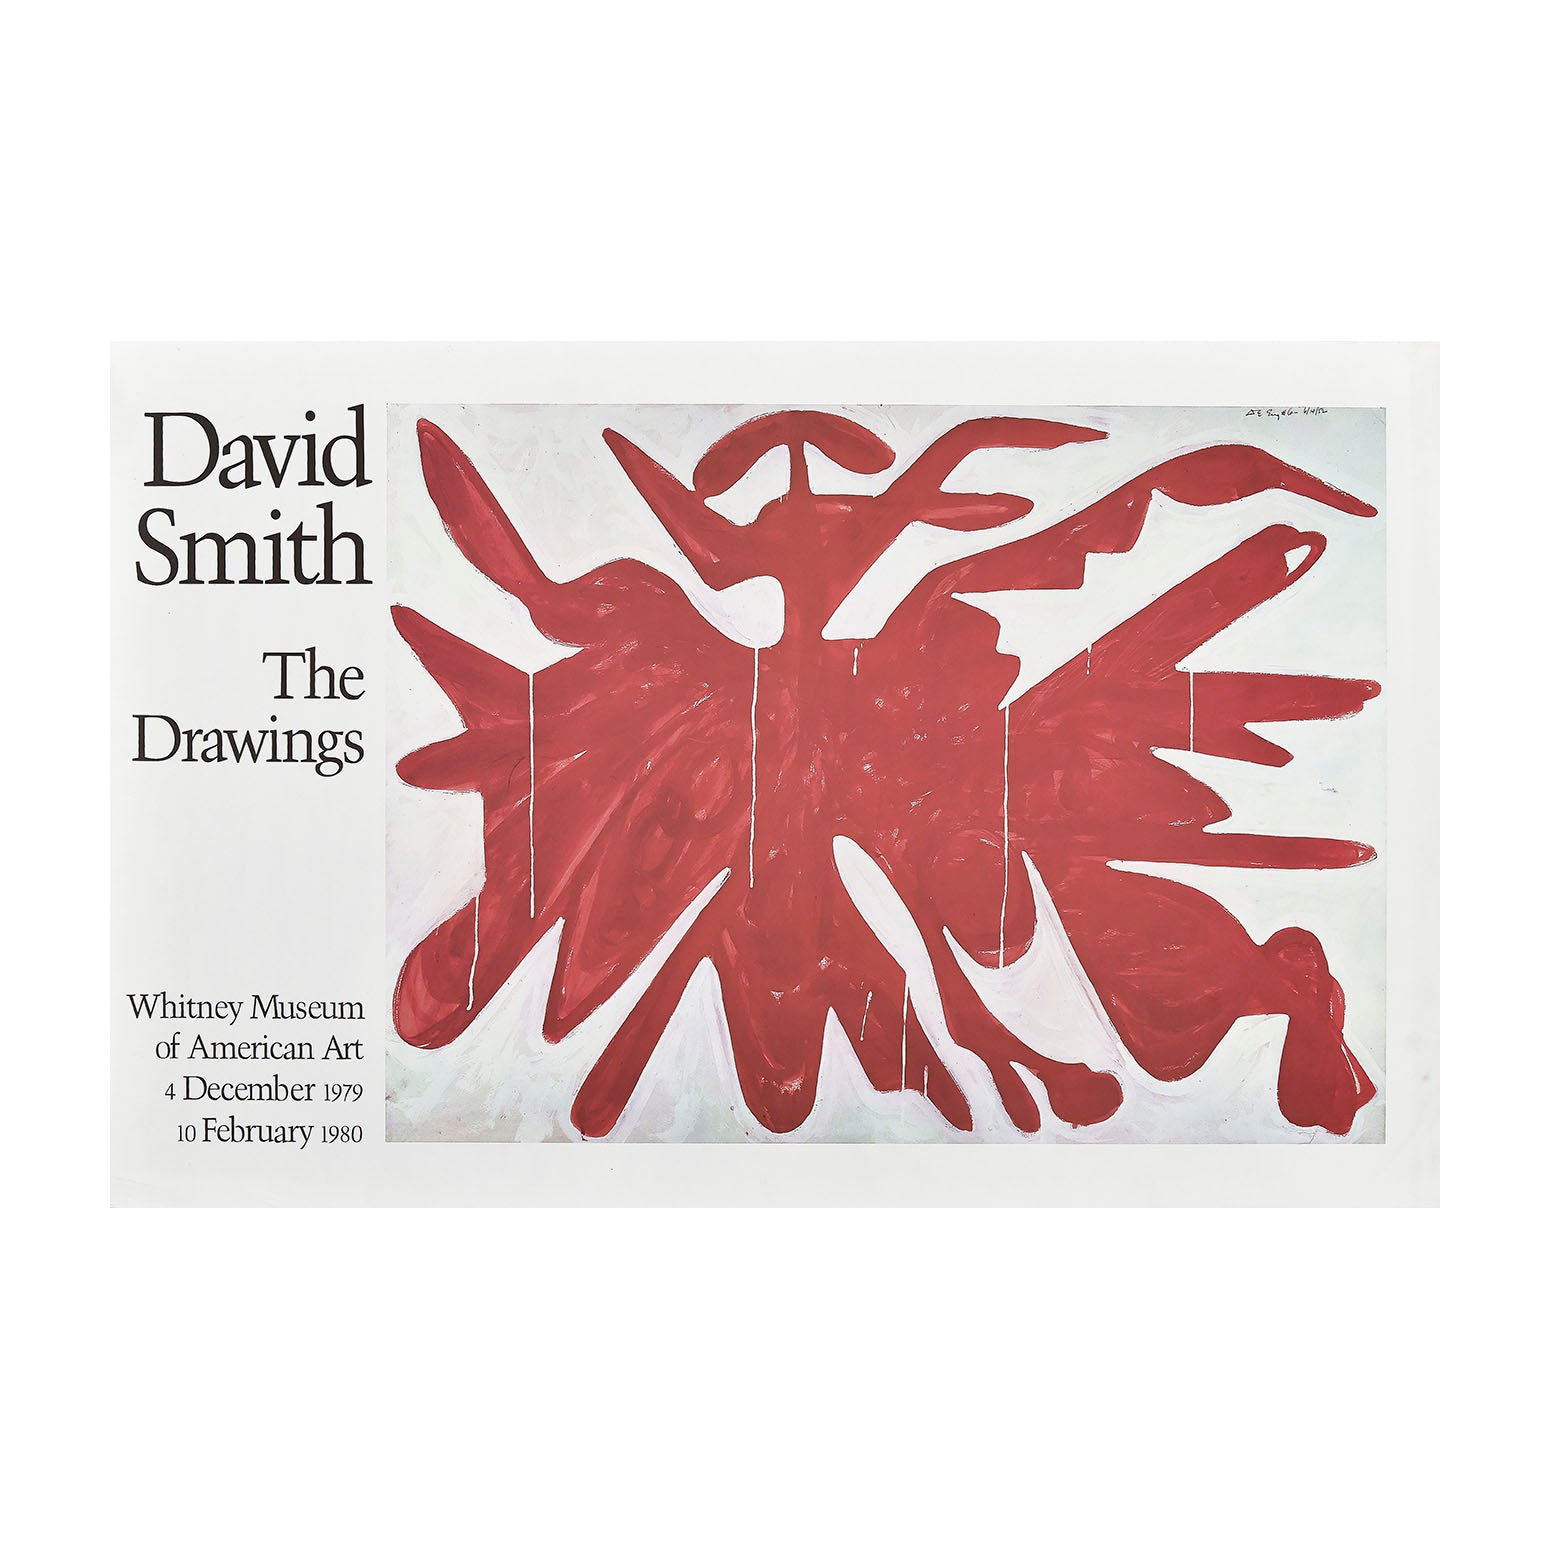  art exhibition poster, David Smith. The Drawings, held at the Whitney Museum of American Art, 1979. The design features a 1952 abstract drawing by the American expressionist sculptor and painter David Smith